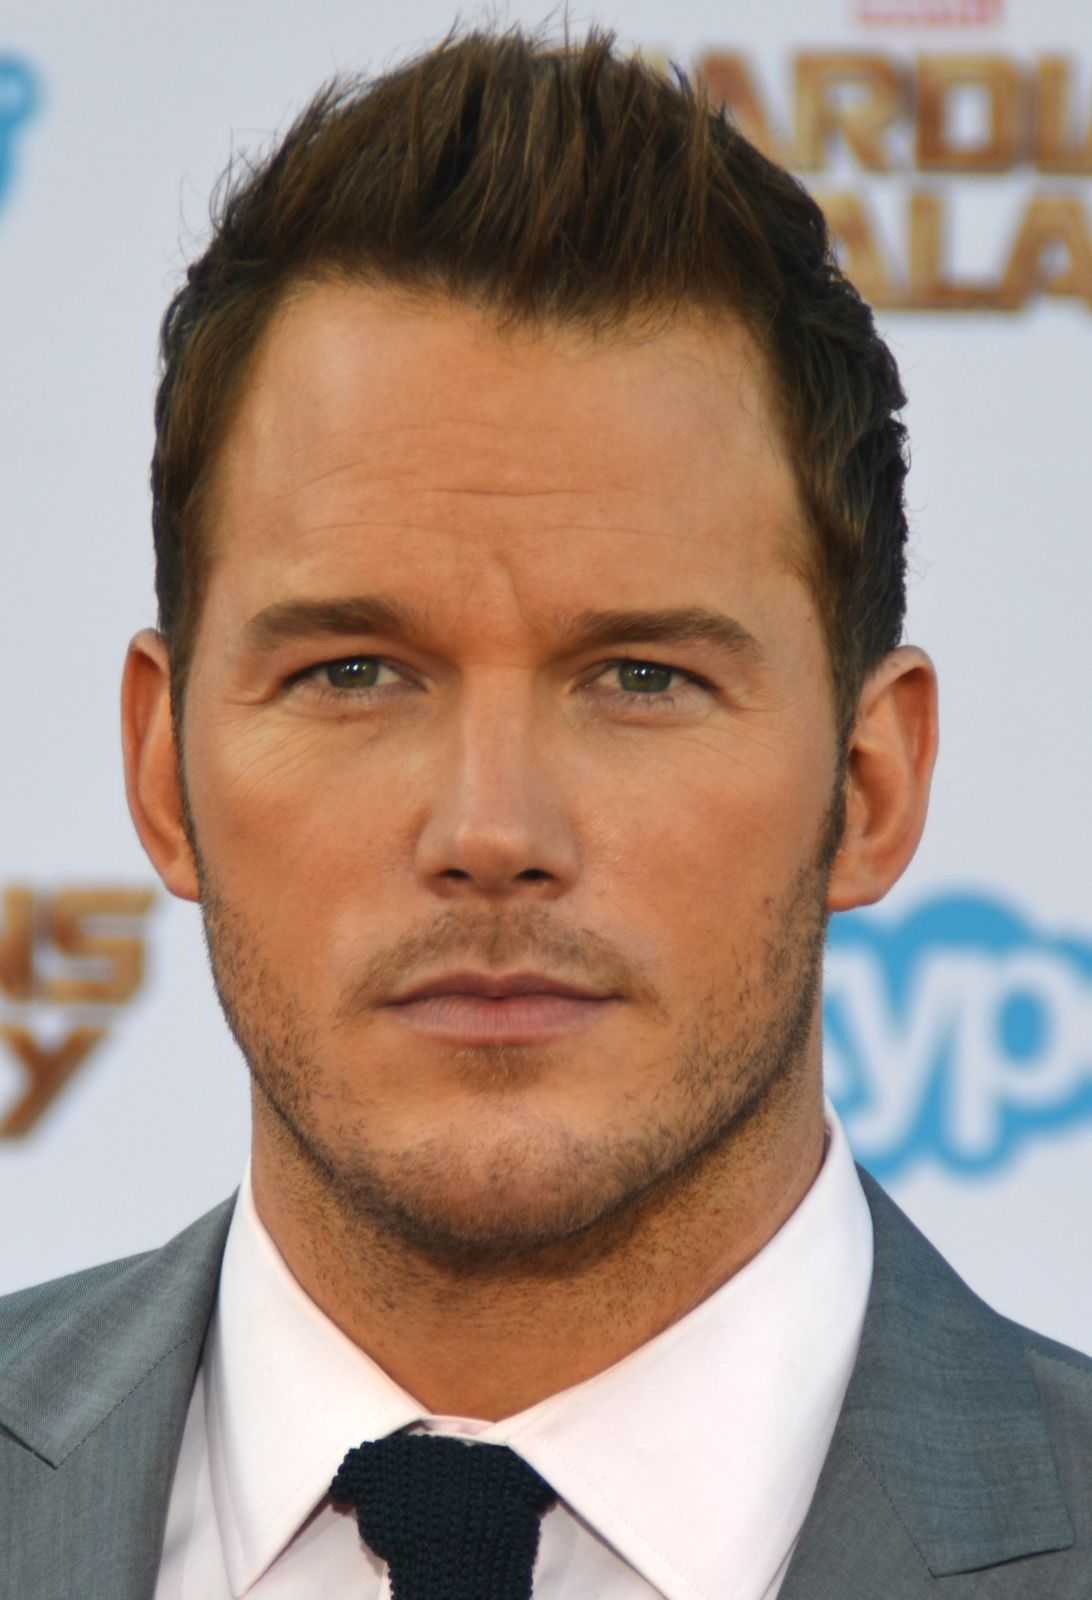 ‘People used to blatantly hit on my wife in front of me’: Chris Pratt